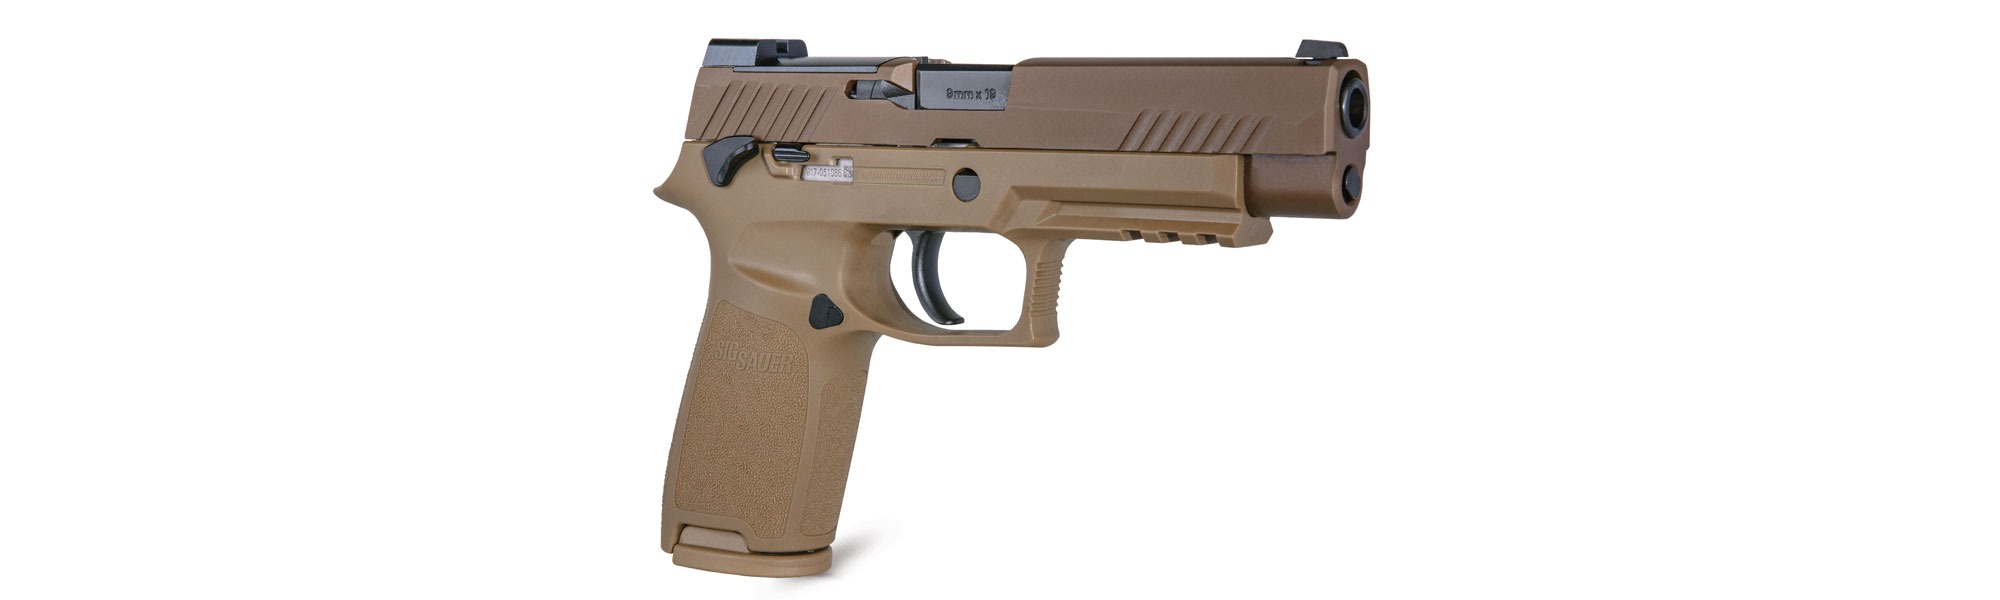 The M17 pistol is featured as a coyote tan civilian version.